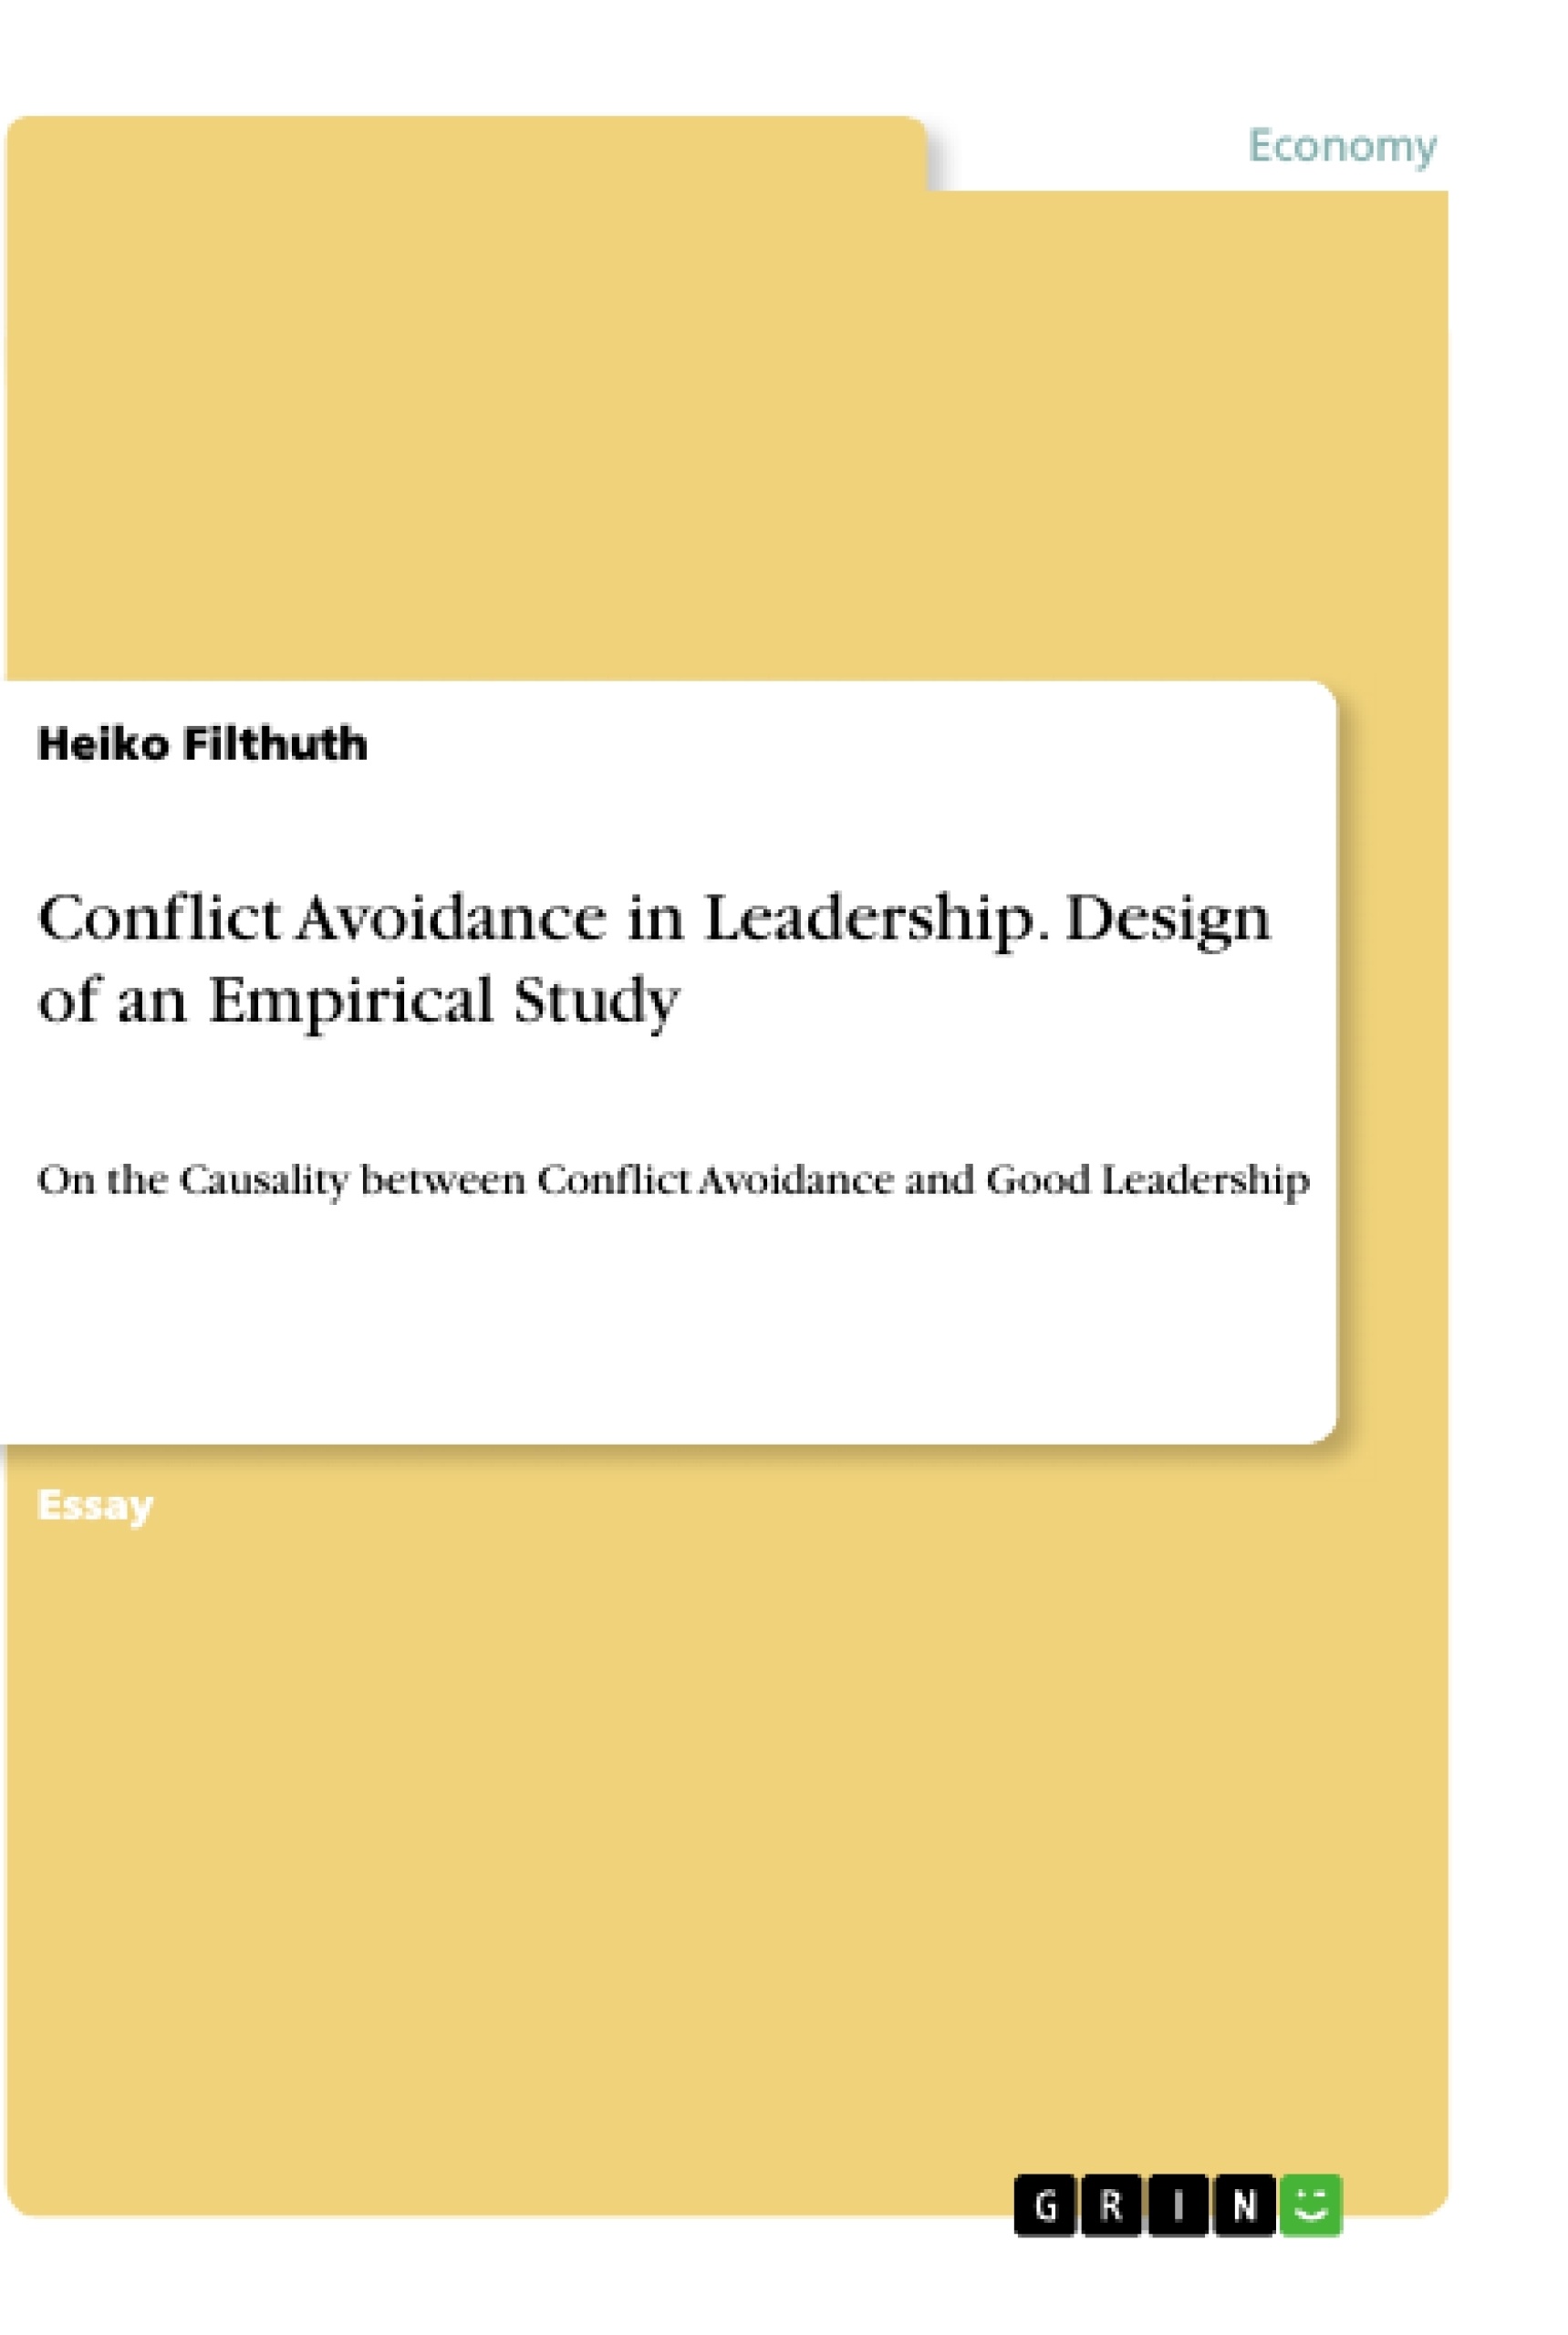 Titre: Conflict Avoidance in Leadership. Design of an Empirical Study